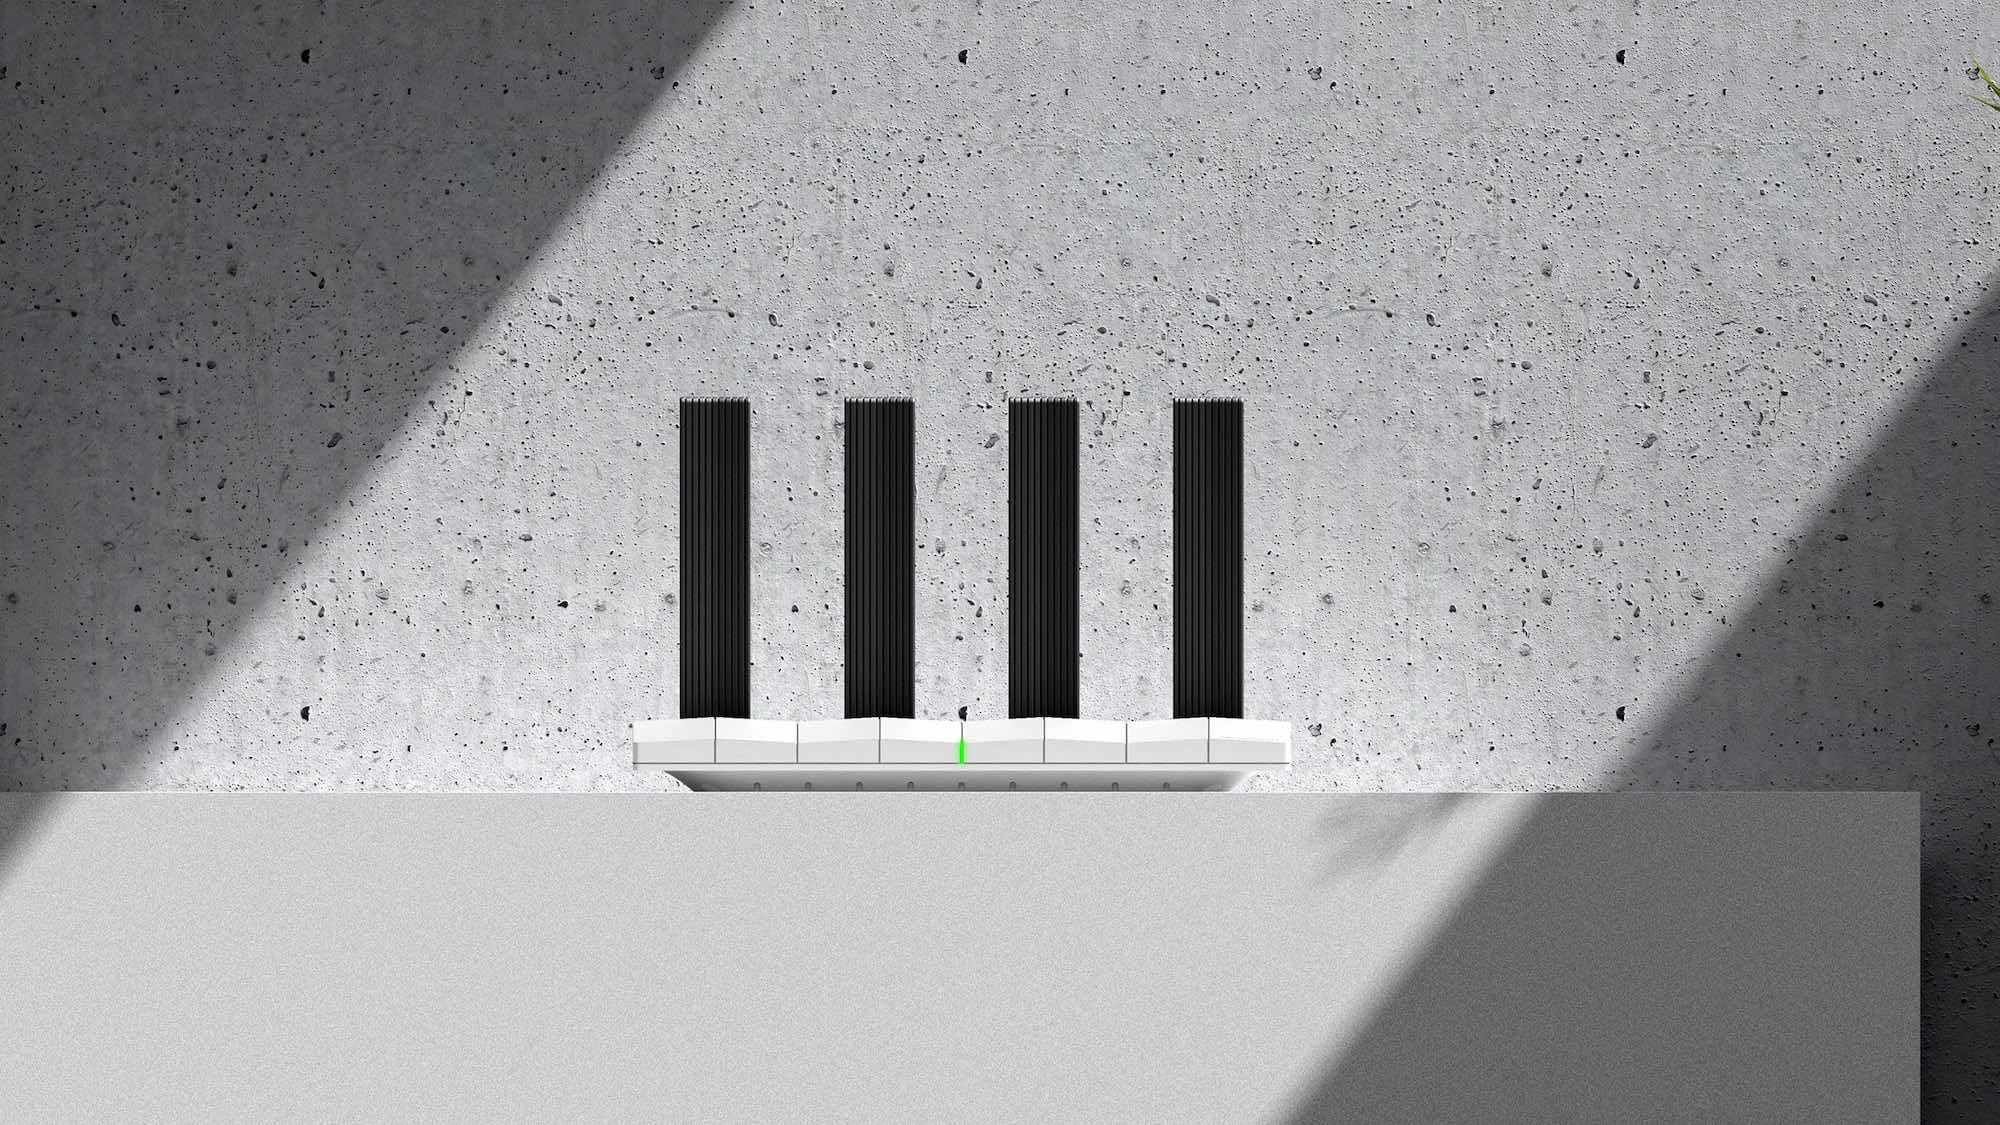 Piano Wi-Fi 6 router gives your internet connection a unique look